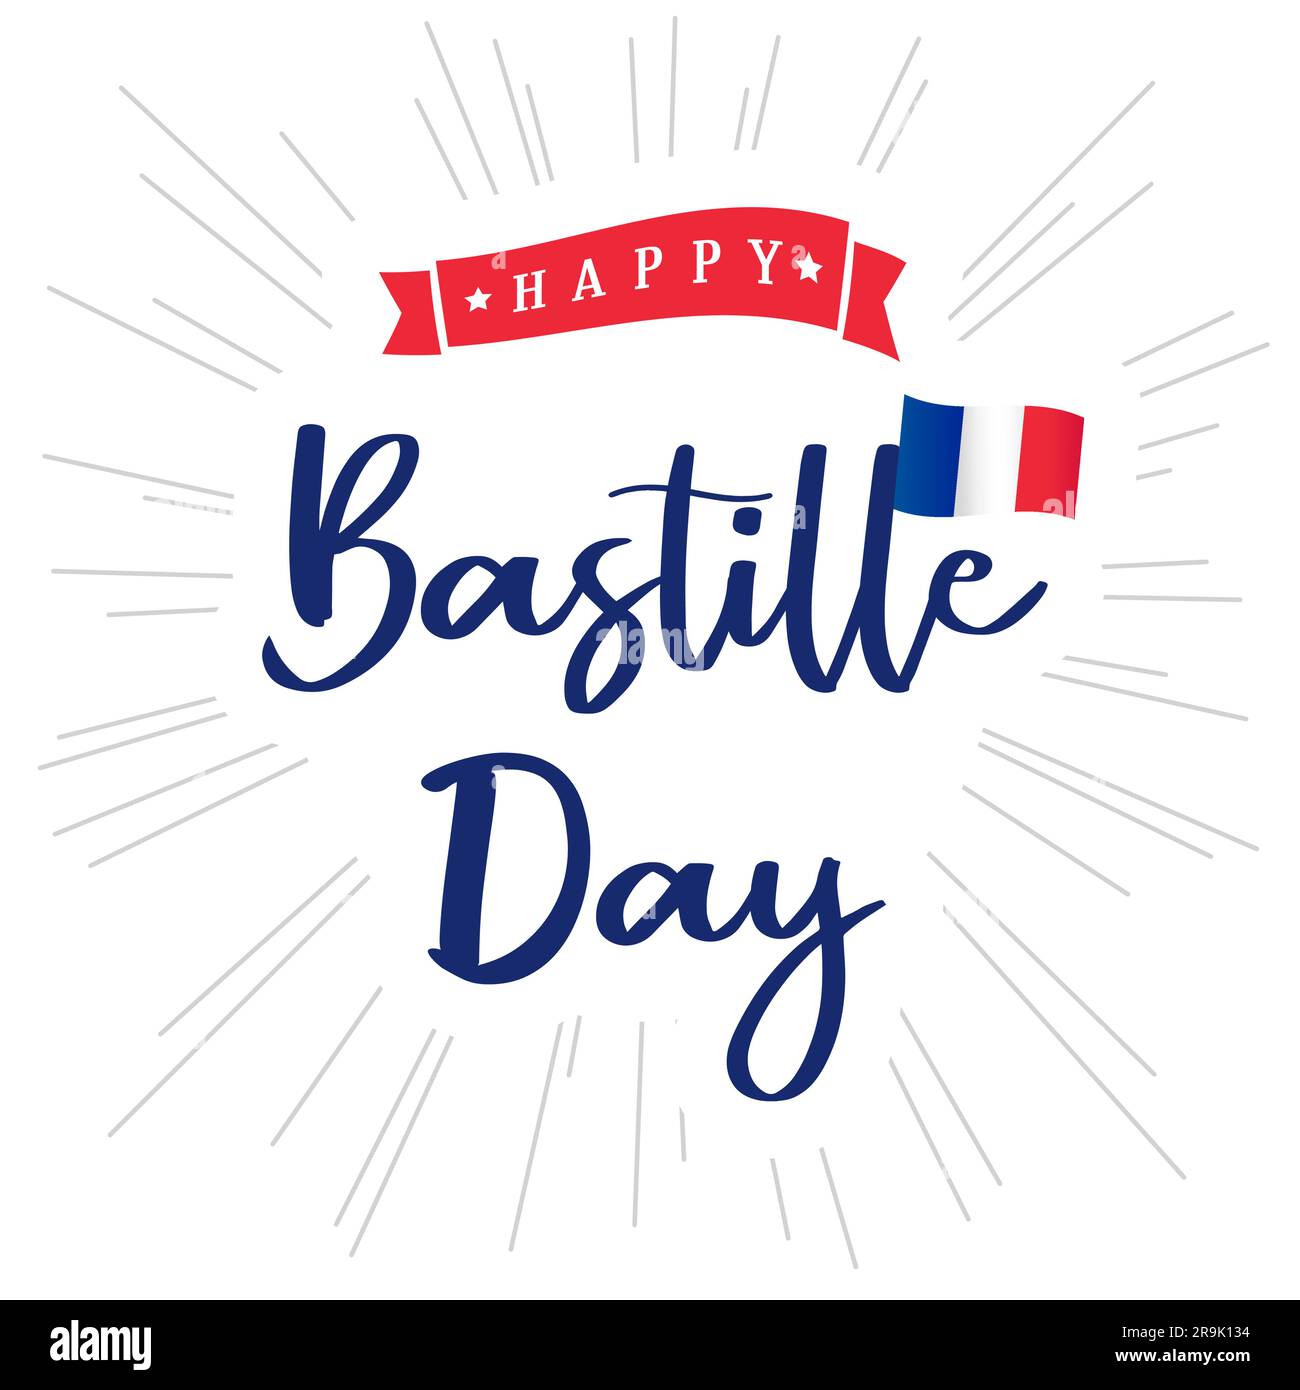 14 Juillet, Bonne Fete Nationale, French lettering - 14 July, Happy National Day. Bastille Day greeting card with Eiffel tower and Colonne de Juillet. Stock Vector